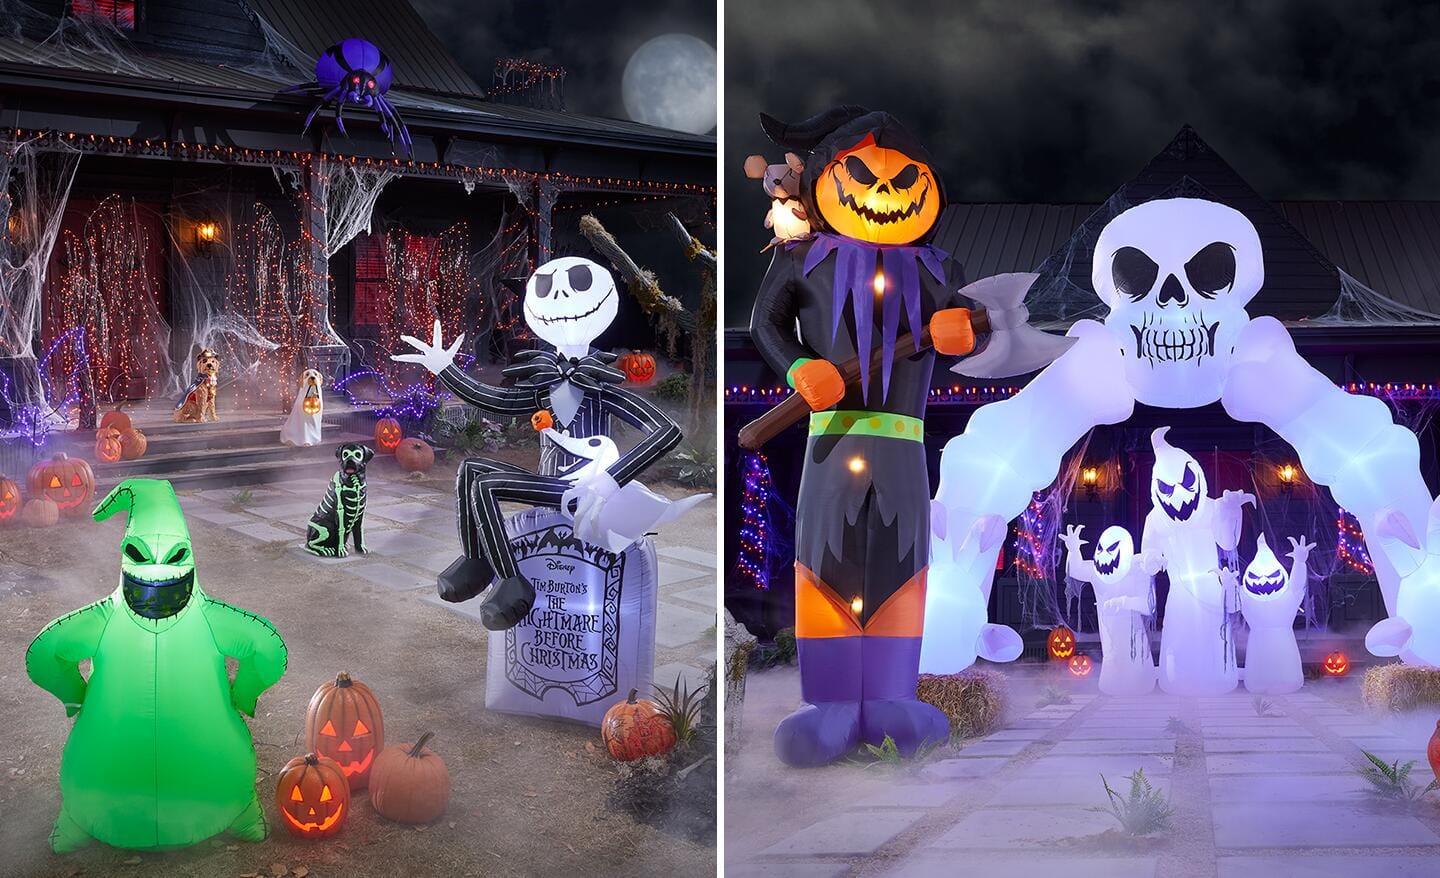 A dual image of assorted Halloween inflatables including a Jack-o'-lantern woodsman, ghosts and a mini-Jack Skellington.